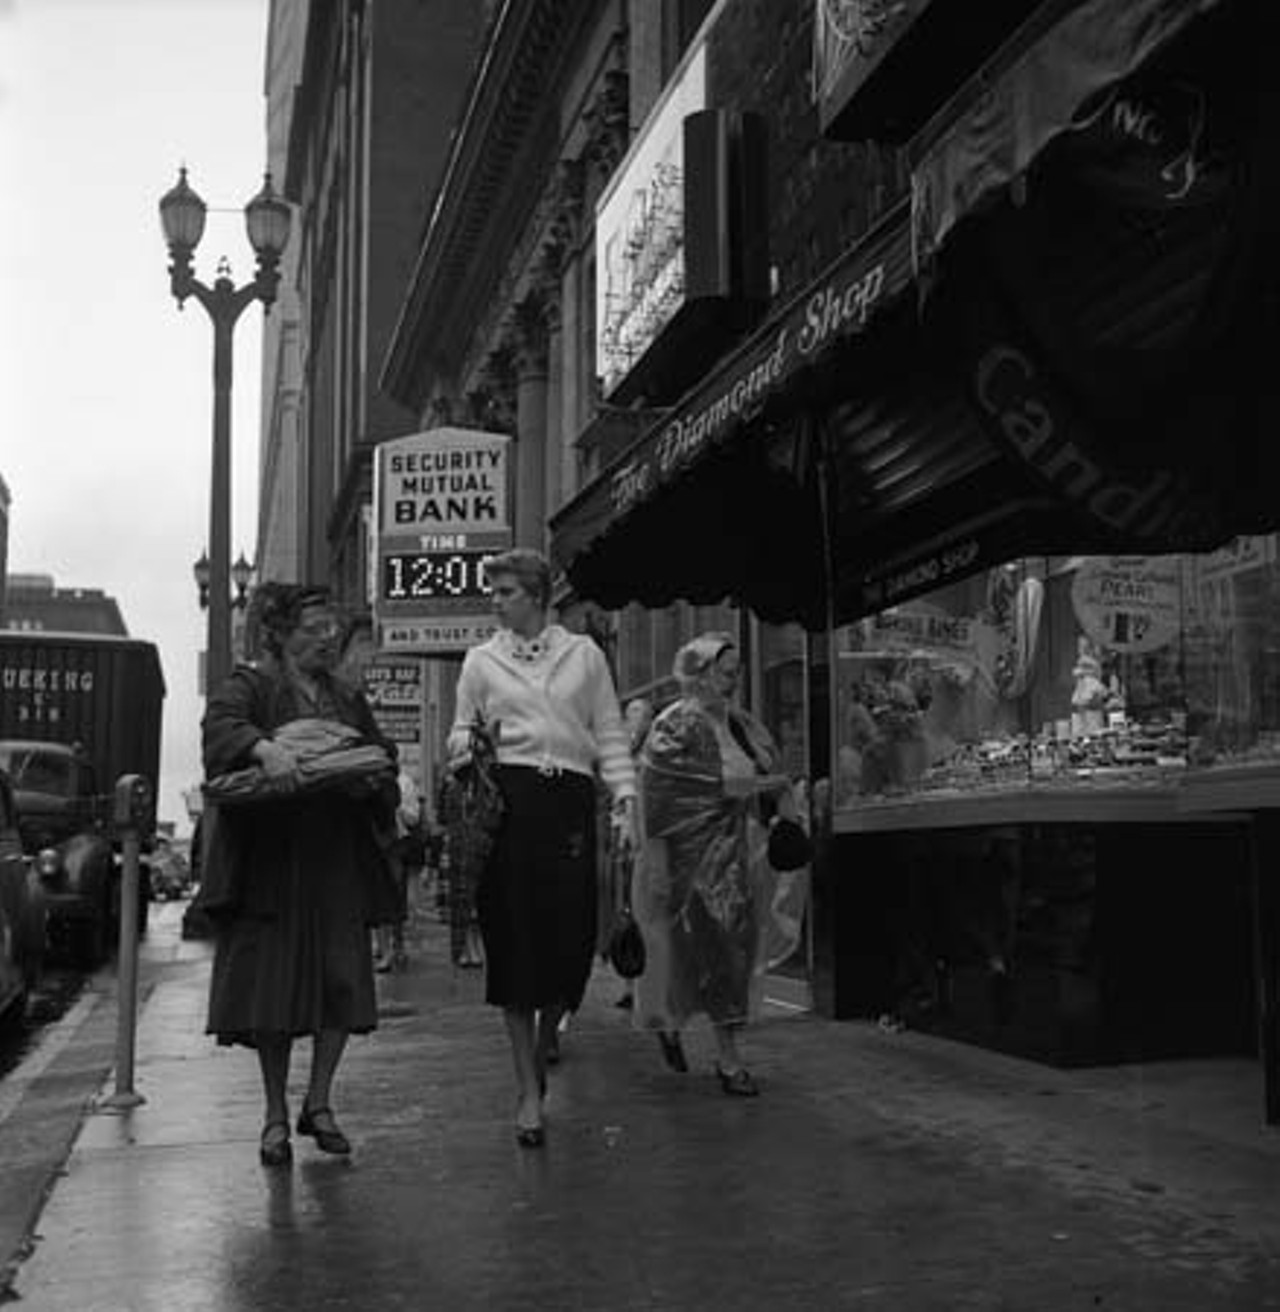 30 Awesome Vintage Photos Depict?ing? a Rainy St. Louis Day in 1958